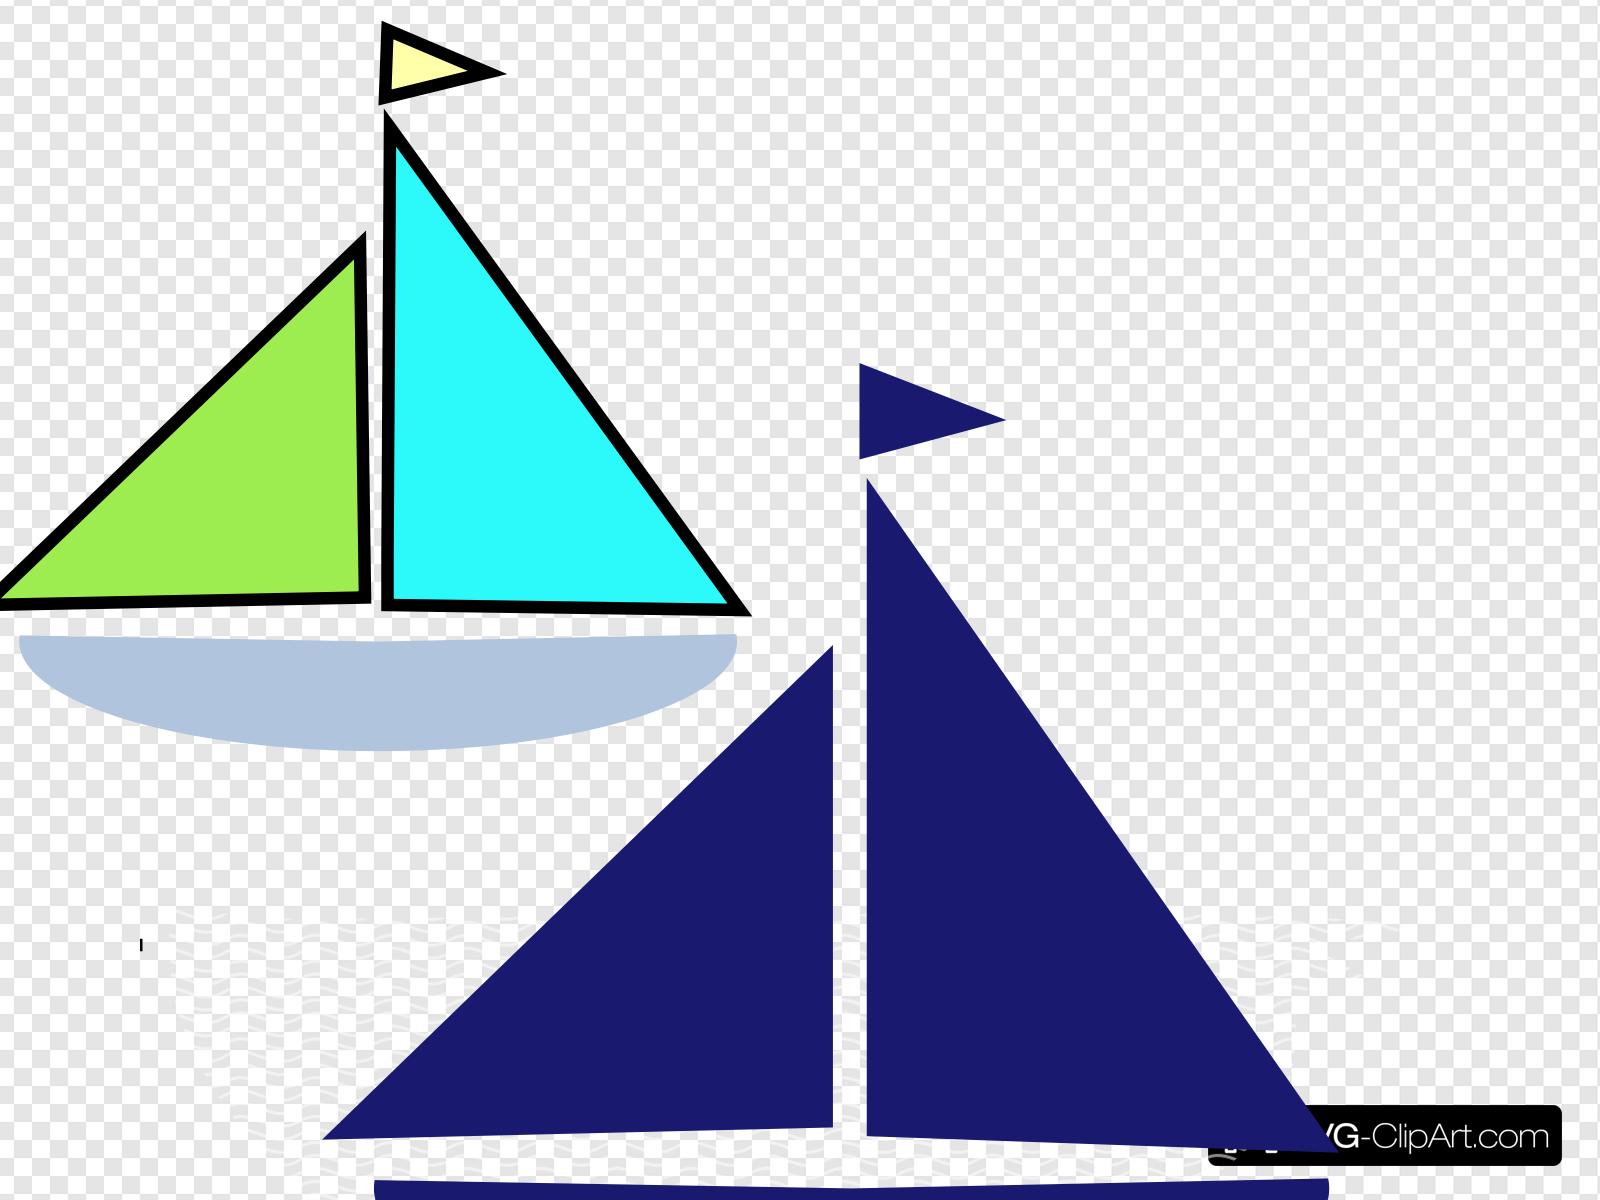 Little Sailboat Clip art, Icon and SVG